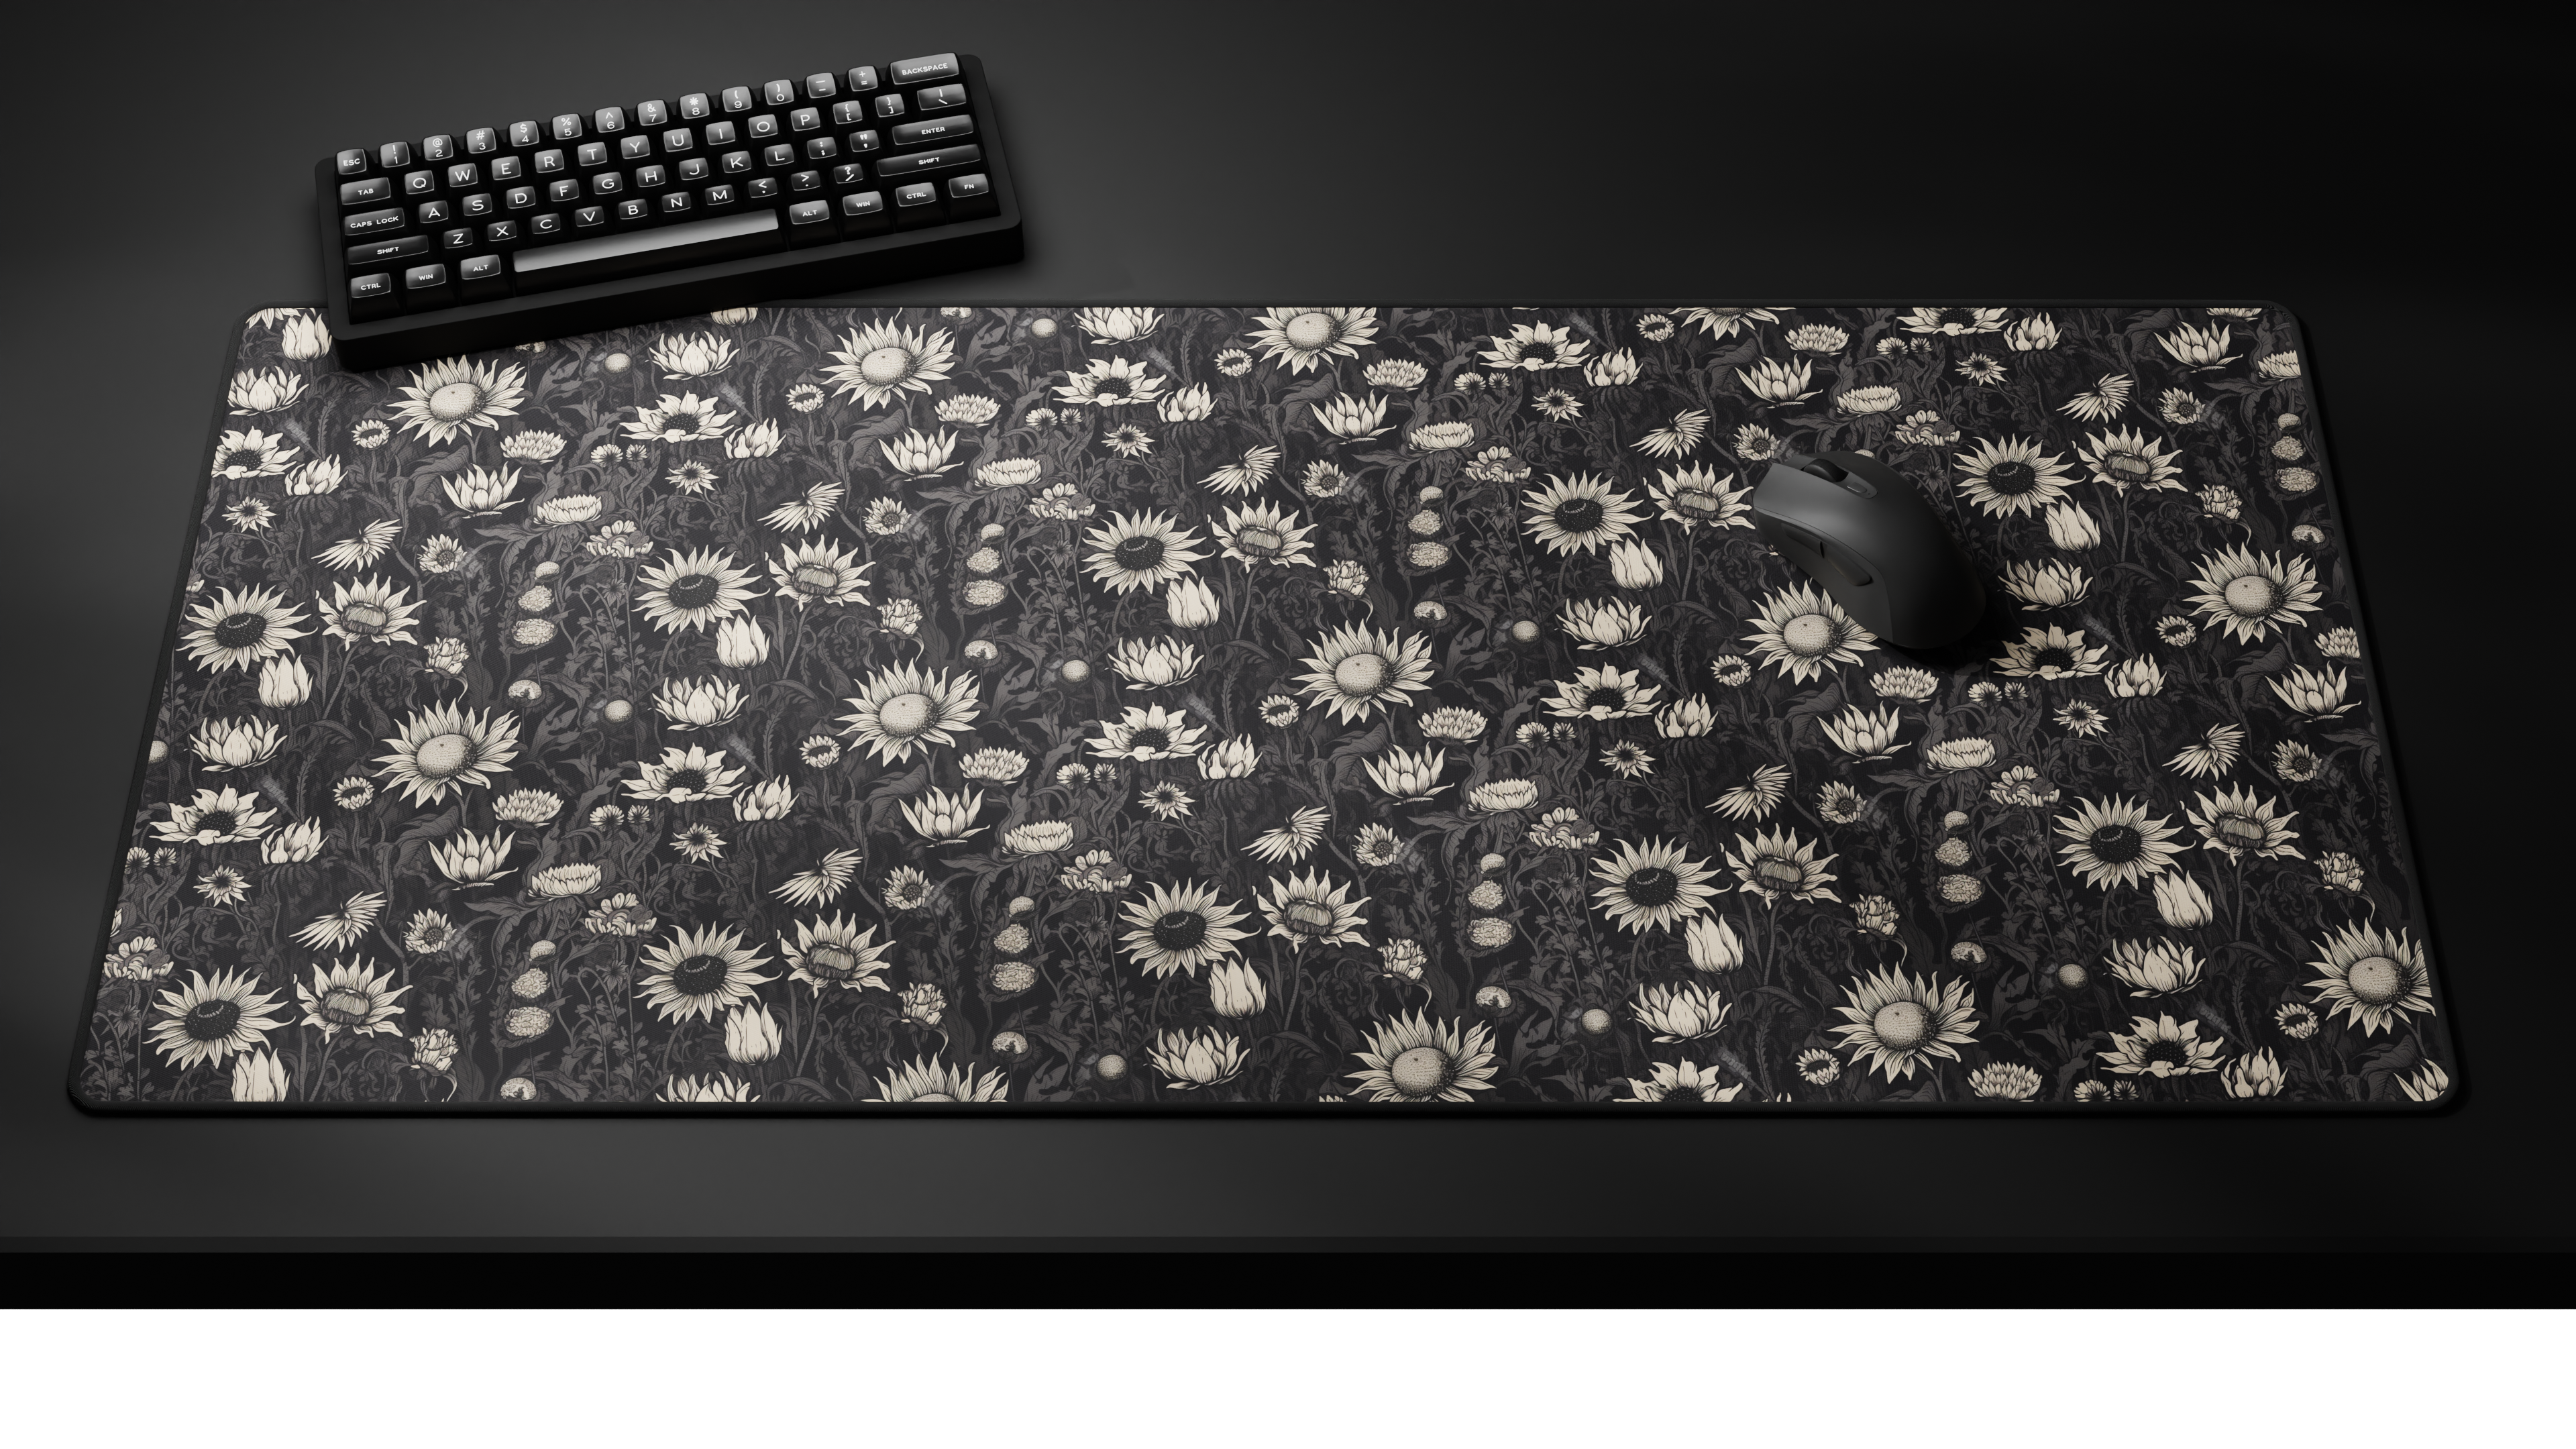 Deskmat 'Arcana Collection - Moonflowers' by glutch